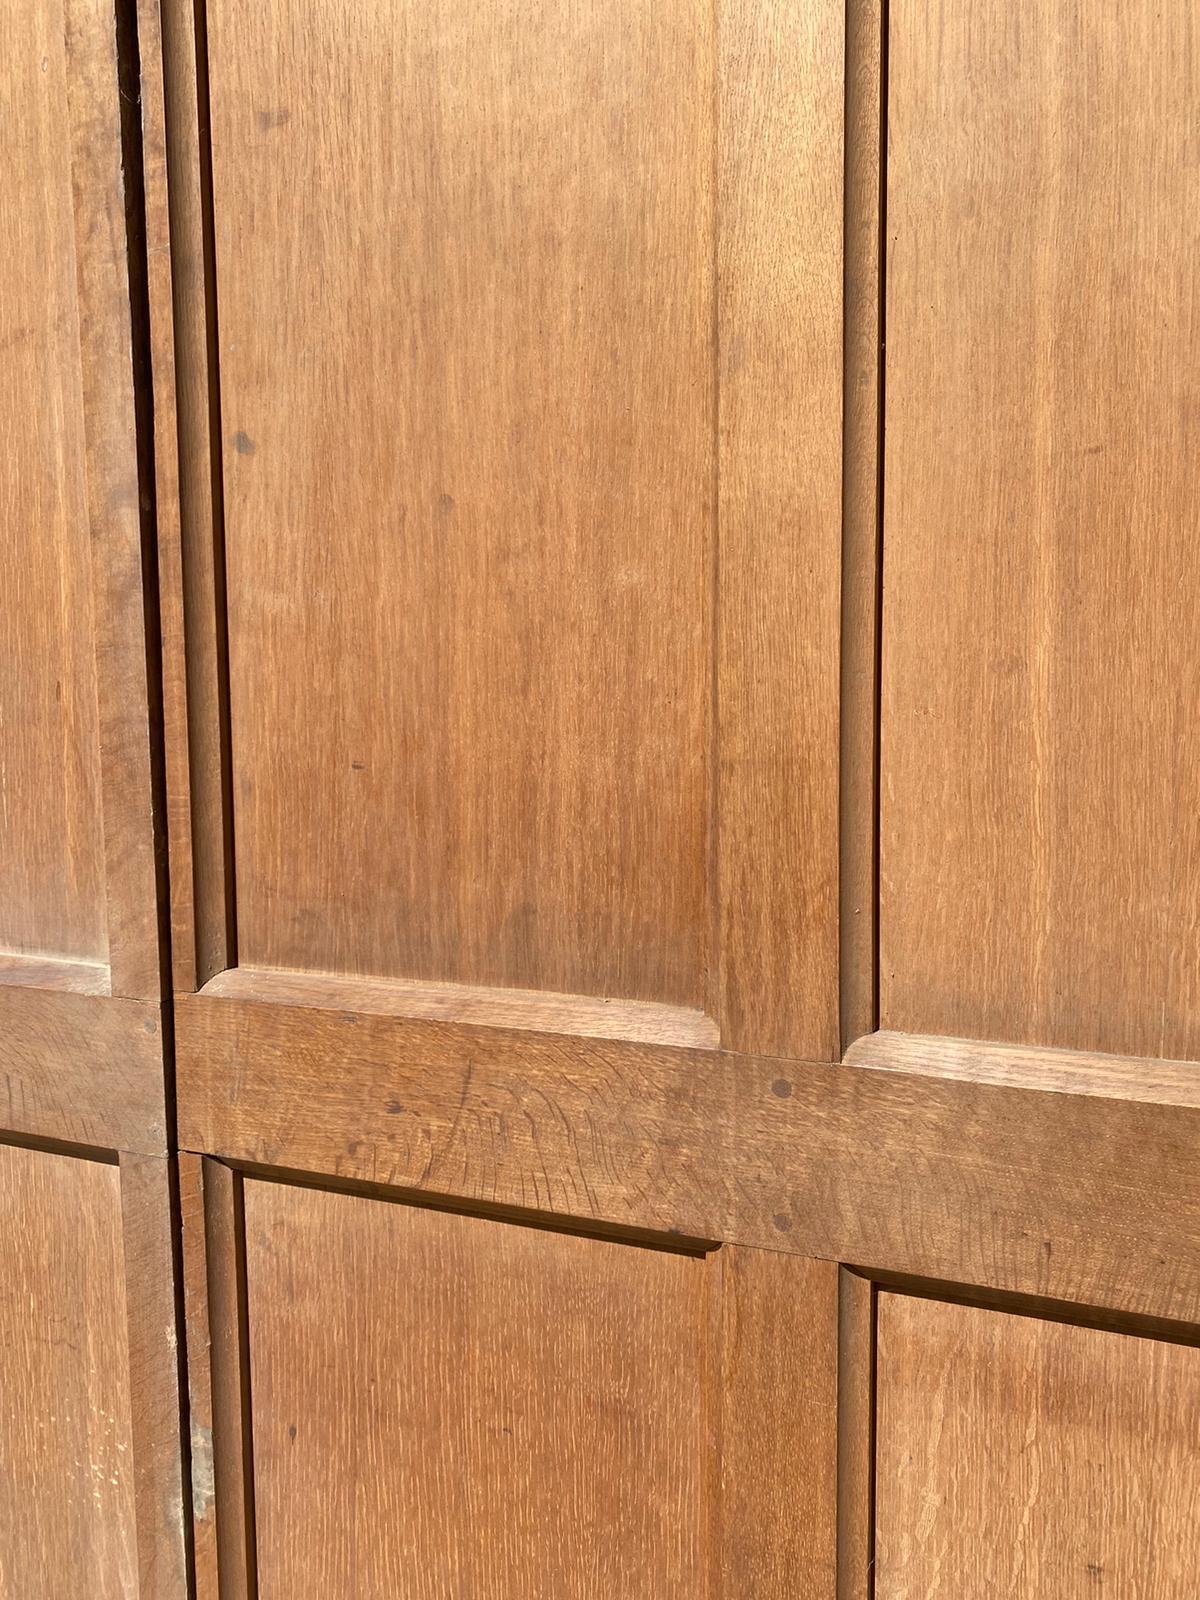 A useful quantity of three quarter height wall paneling, in four sections, reclaimed from a church near Hereford. Totaling 4.6 linear meters.

Additional dimensions

Widths 124.5, 120.5, 126 and 88 cm

Condition report:

Good structural